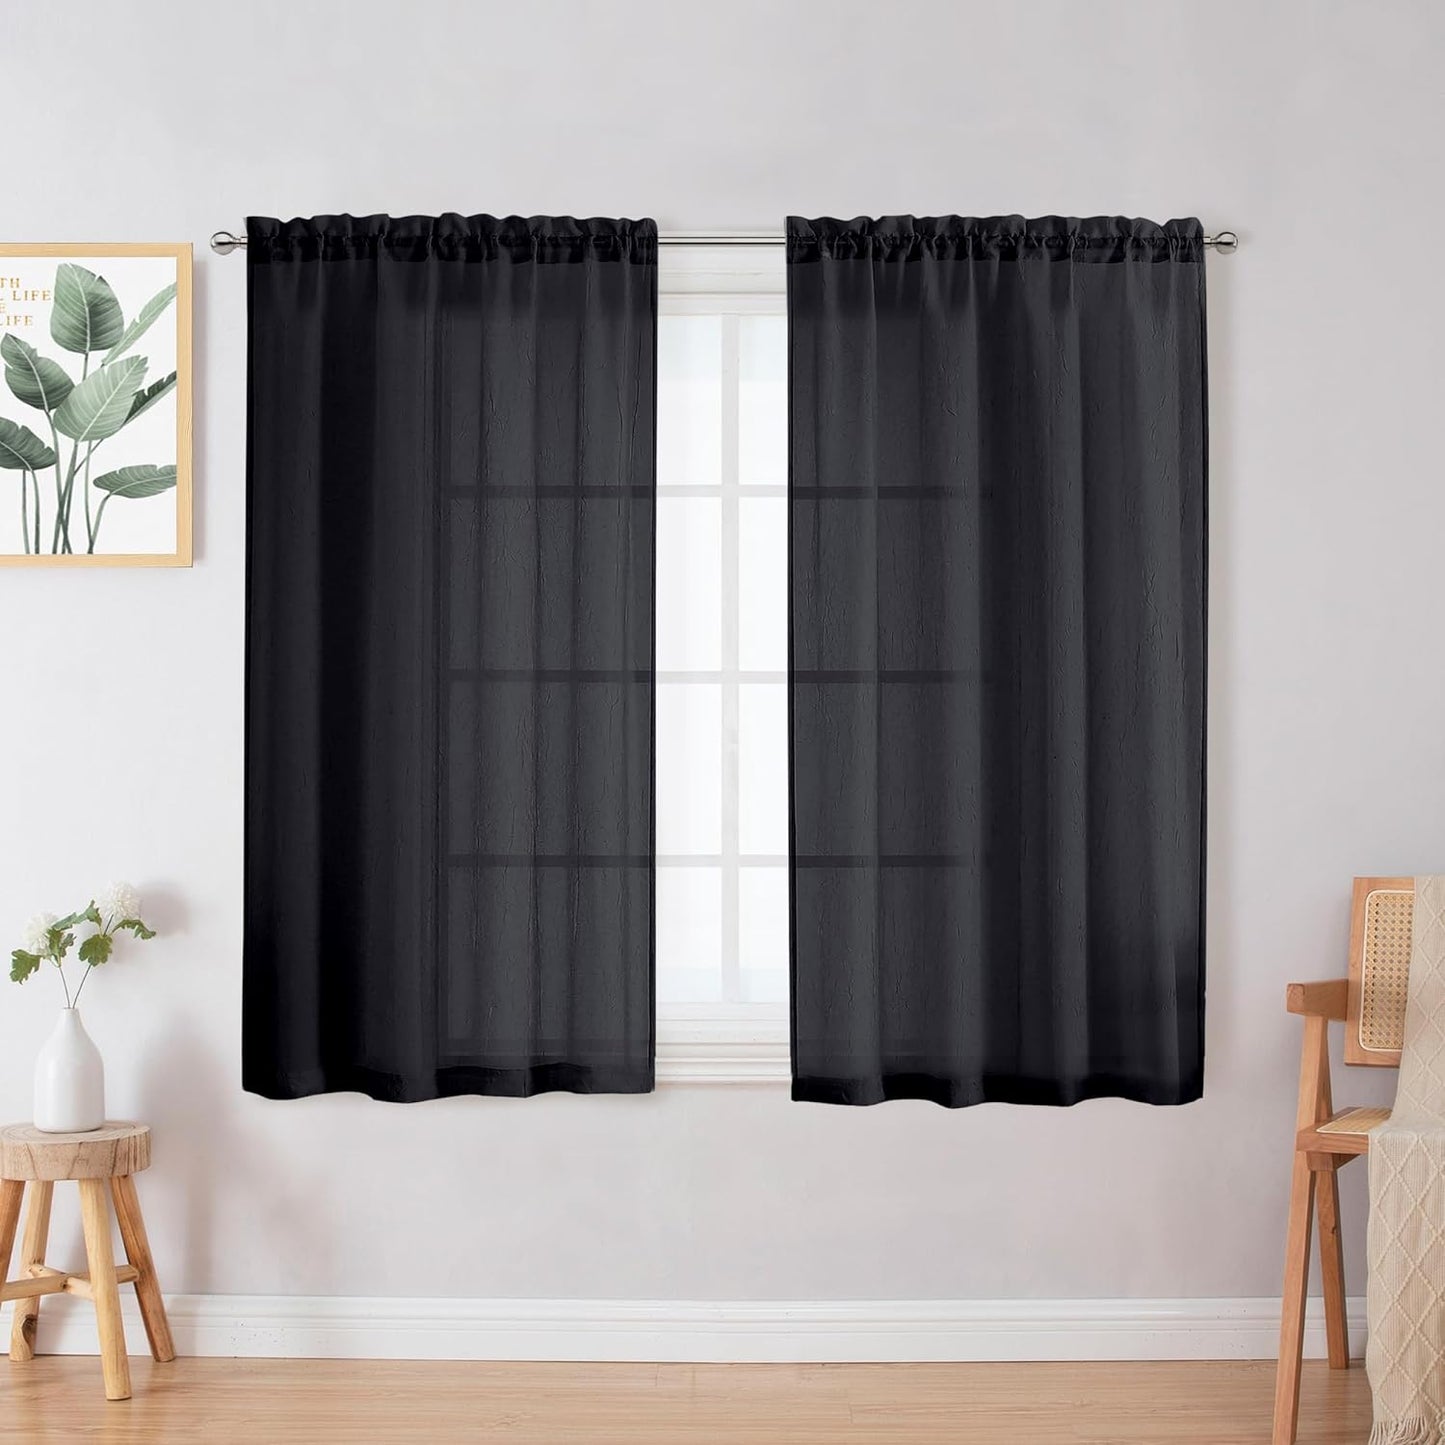 Chyhomenyc Crushed White Sheer Valances for Window 14 Inch Length 2 PCS, Crinkle Voile Short Kitchen Curtains with Dual Rod Pockets，Gauzy Bedroom Curtain Valance，Each 42Wx14L Inches  Chyhomenyc Black 28 W X 45 L 